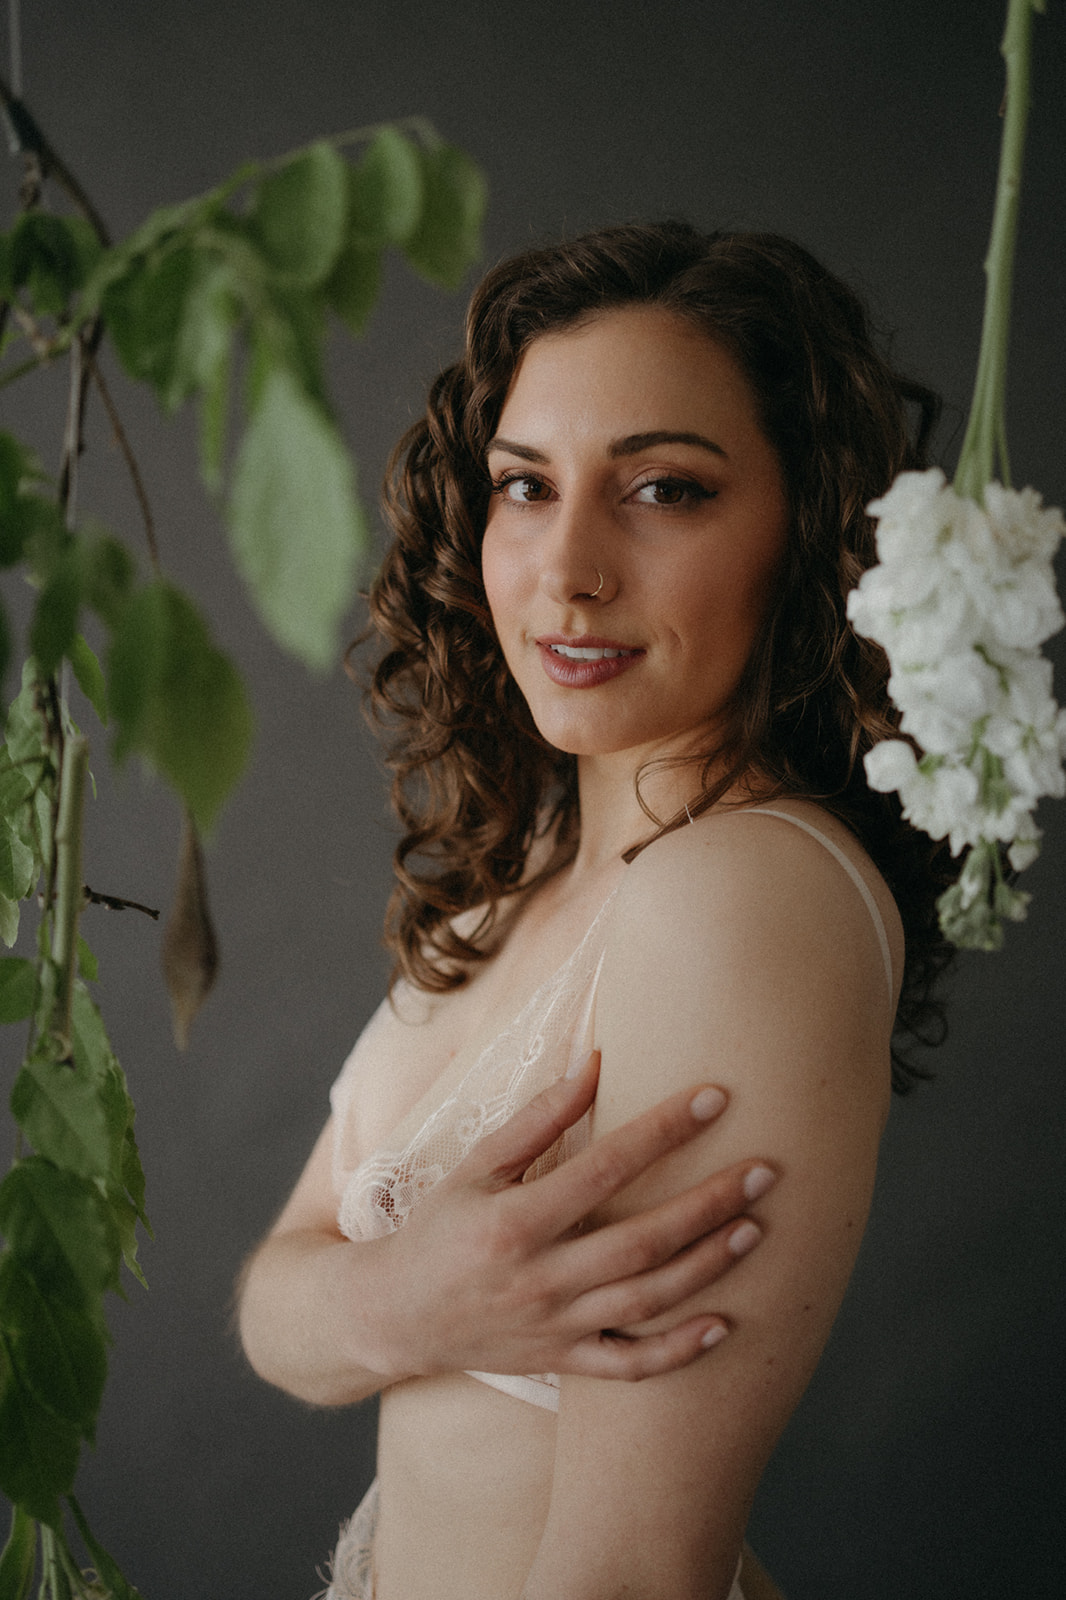 woman standing in greenery in white lace lingerie